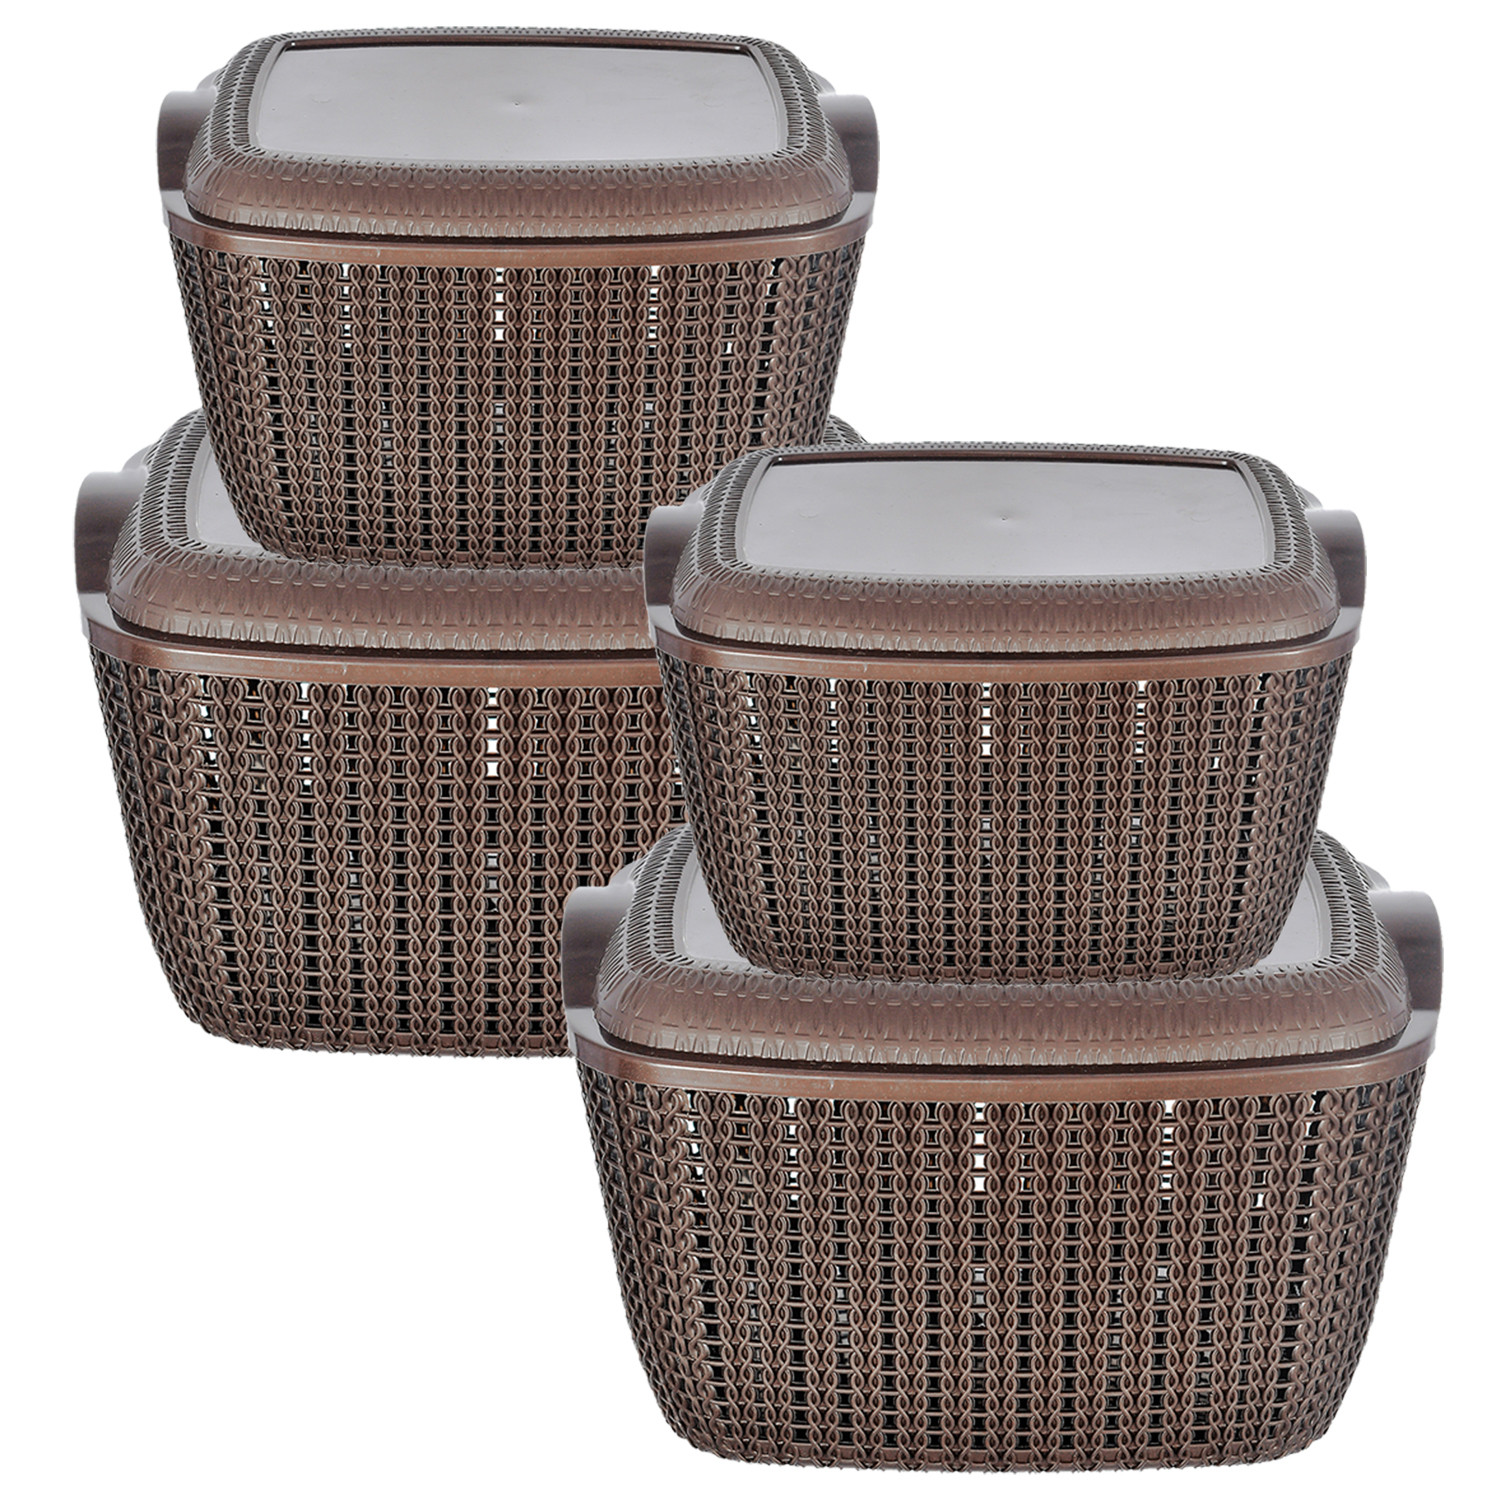 Kuber Industries Multiuses Large & Small M 30-25 Plastic Basket/Organizer With Lid- (Brown) -46KM053